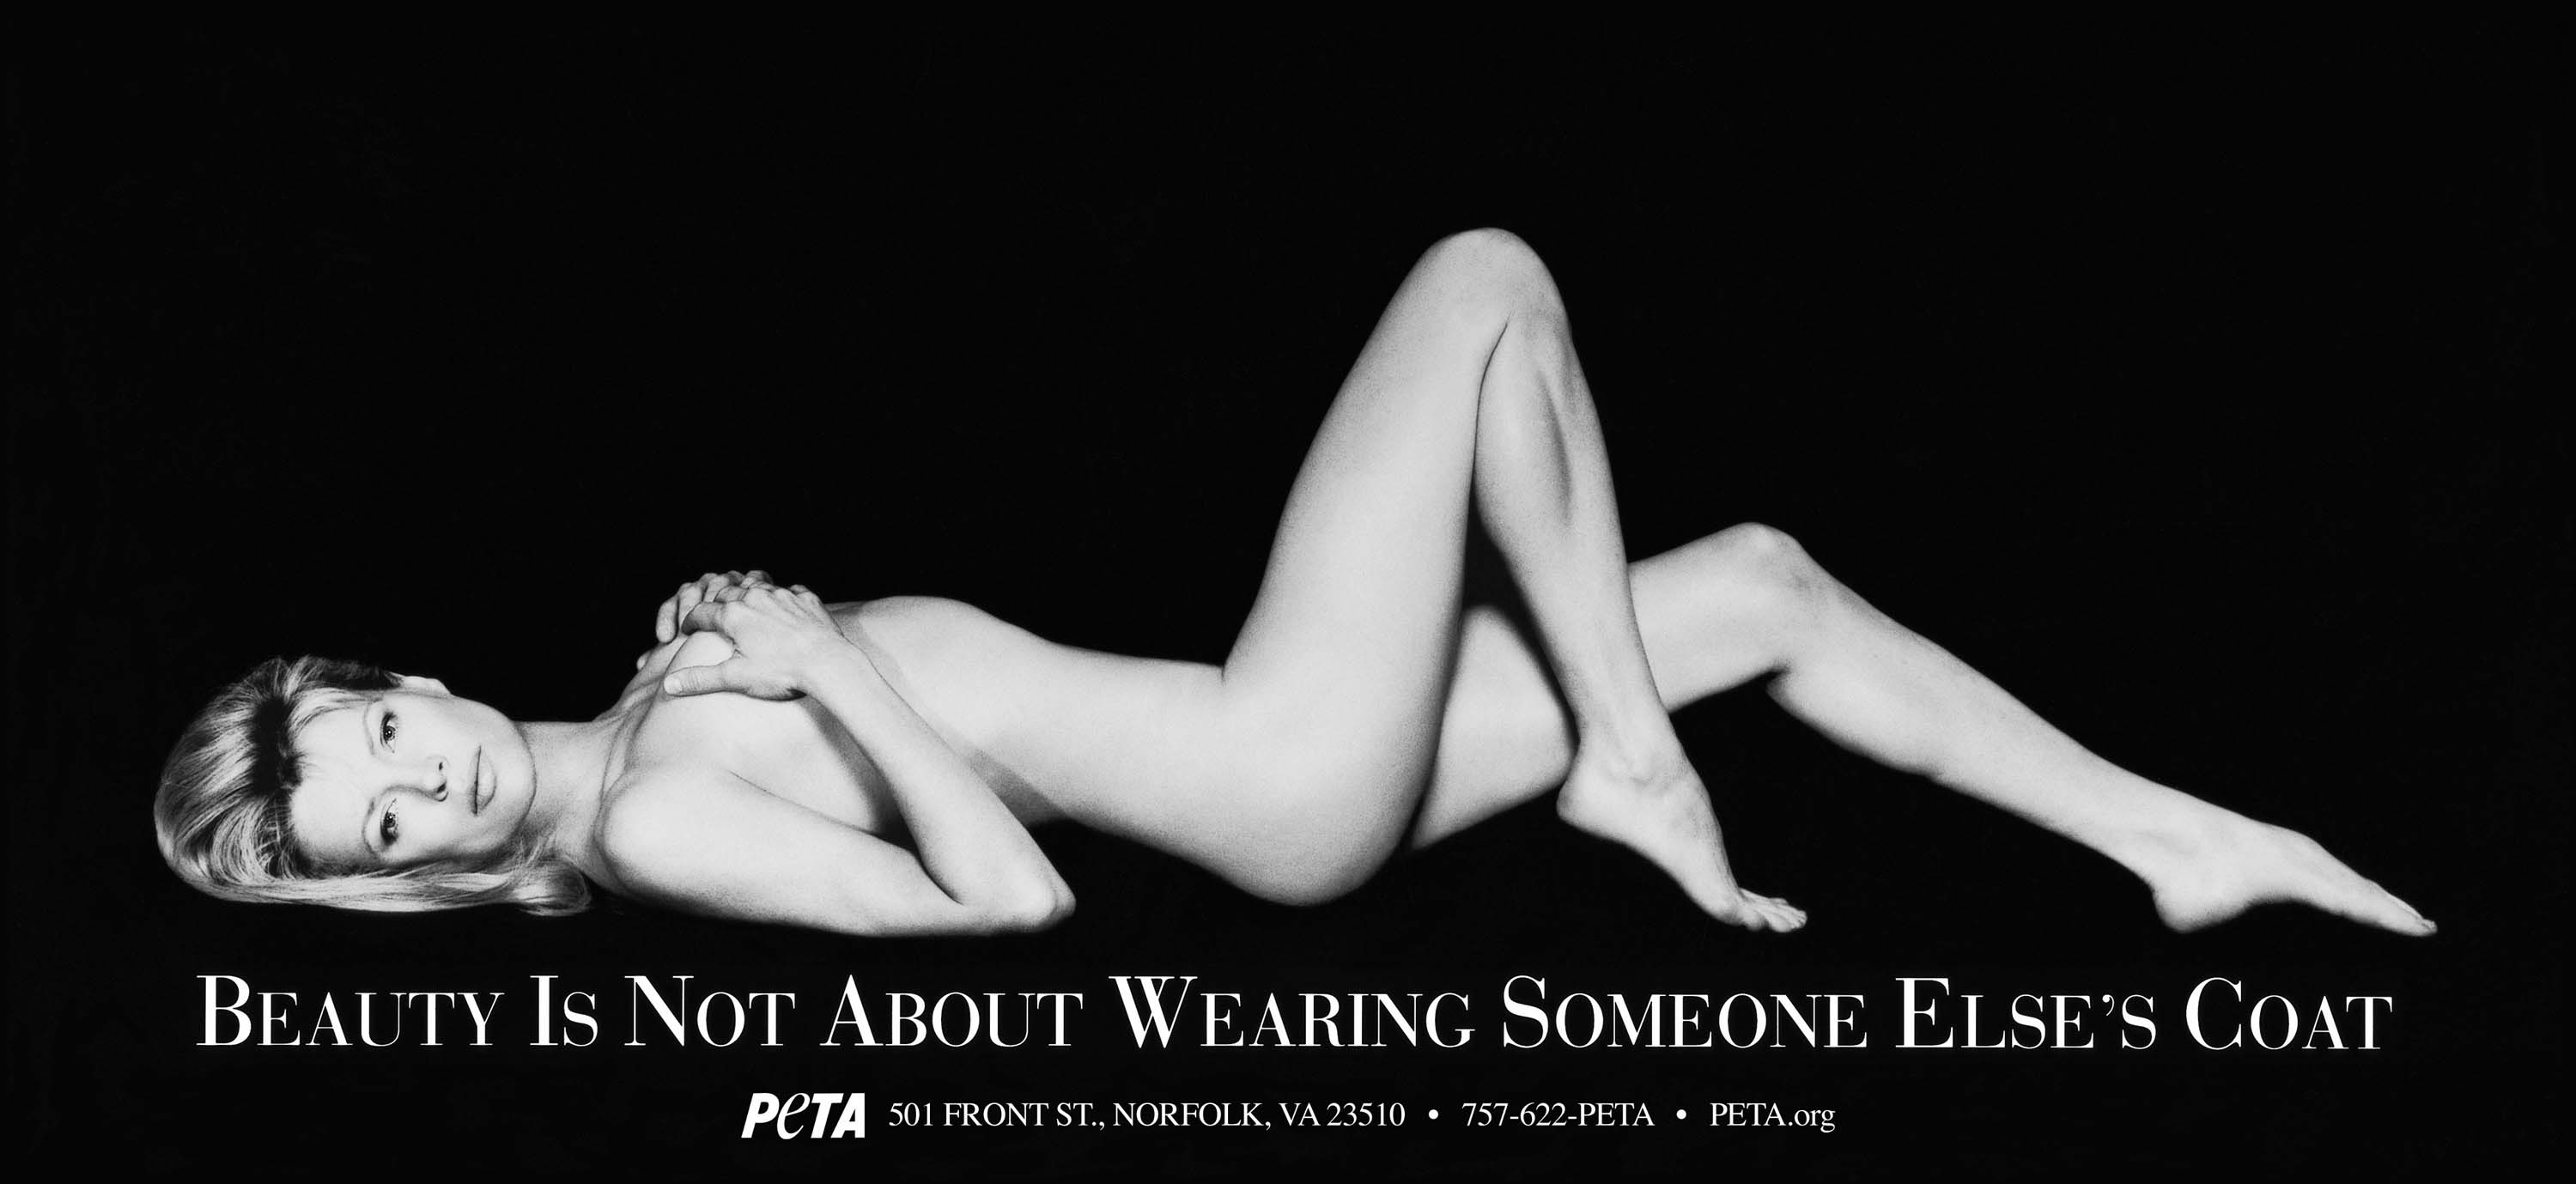 I Would Rather Go Naked Than Wear Fur - PETA Campaigns 2